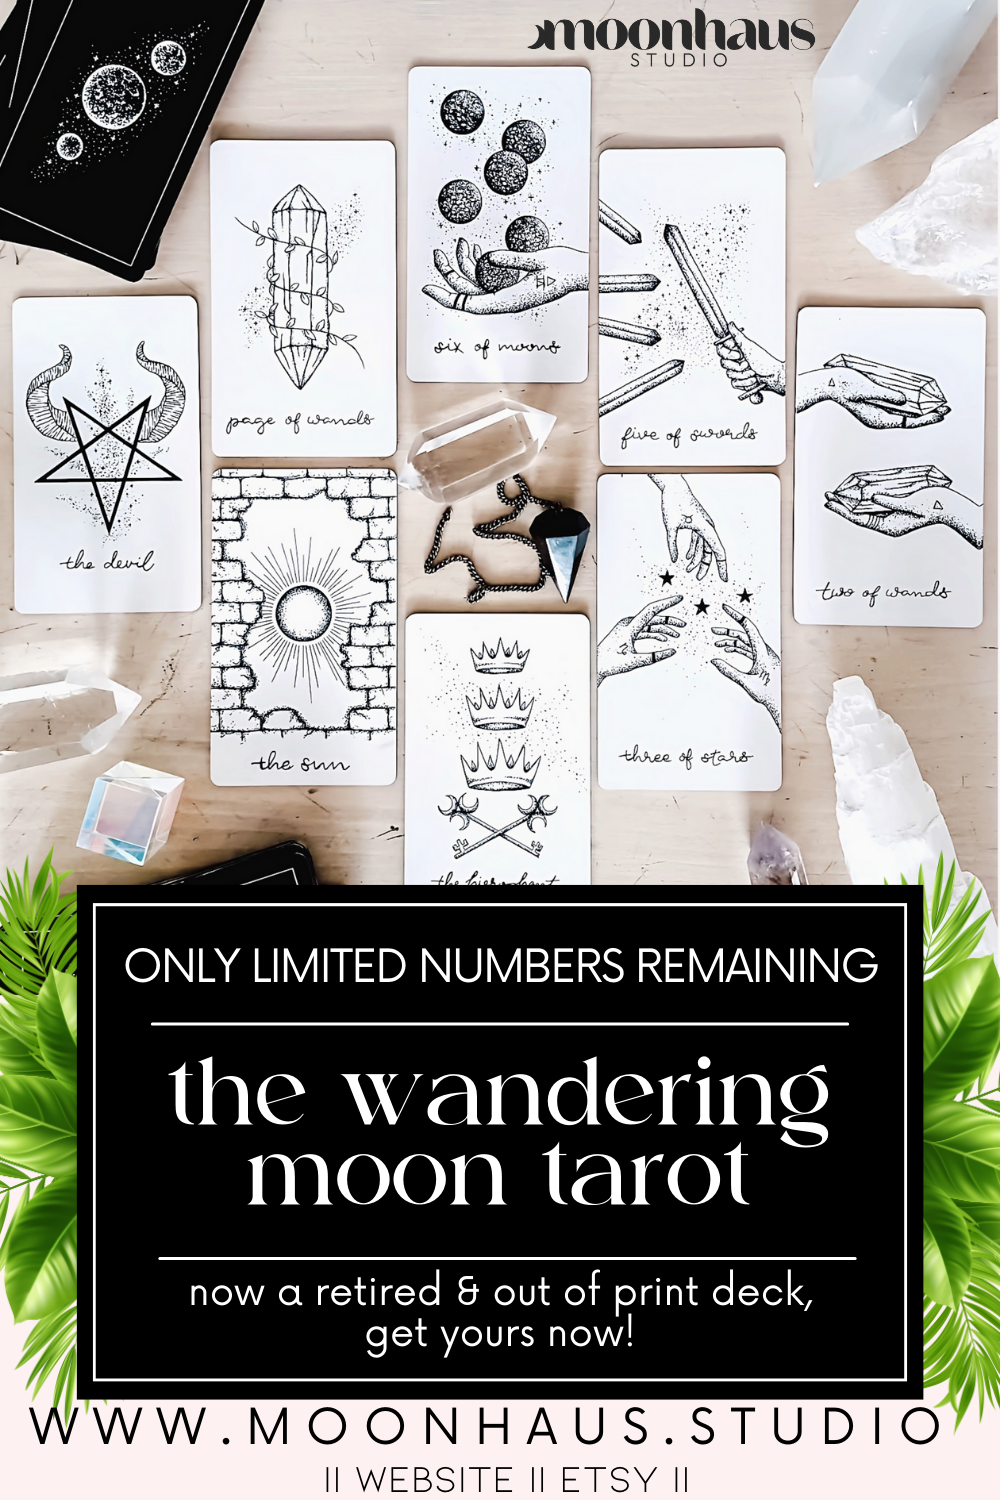 the wandering moon tarot deck - holographic, hand illustrated cards - indie tarot deck with guidebook - beginner tarot deck